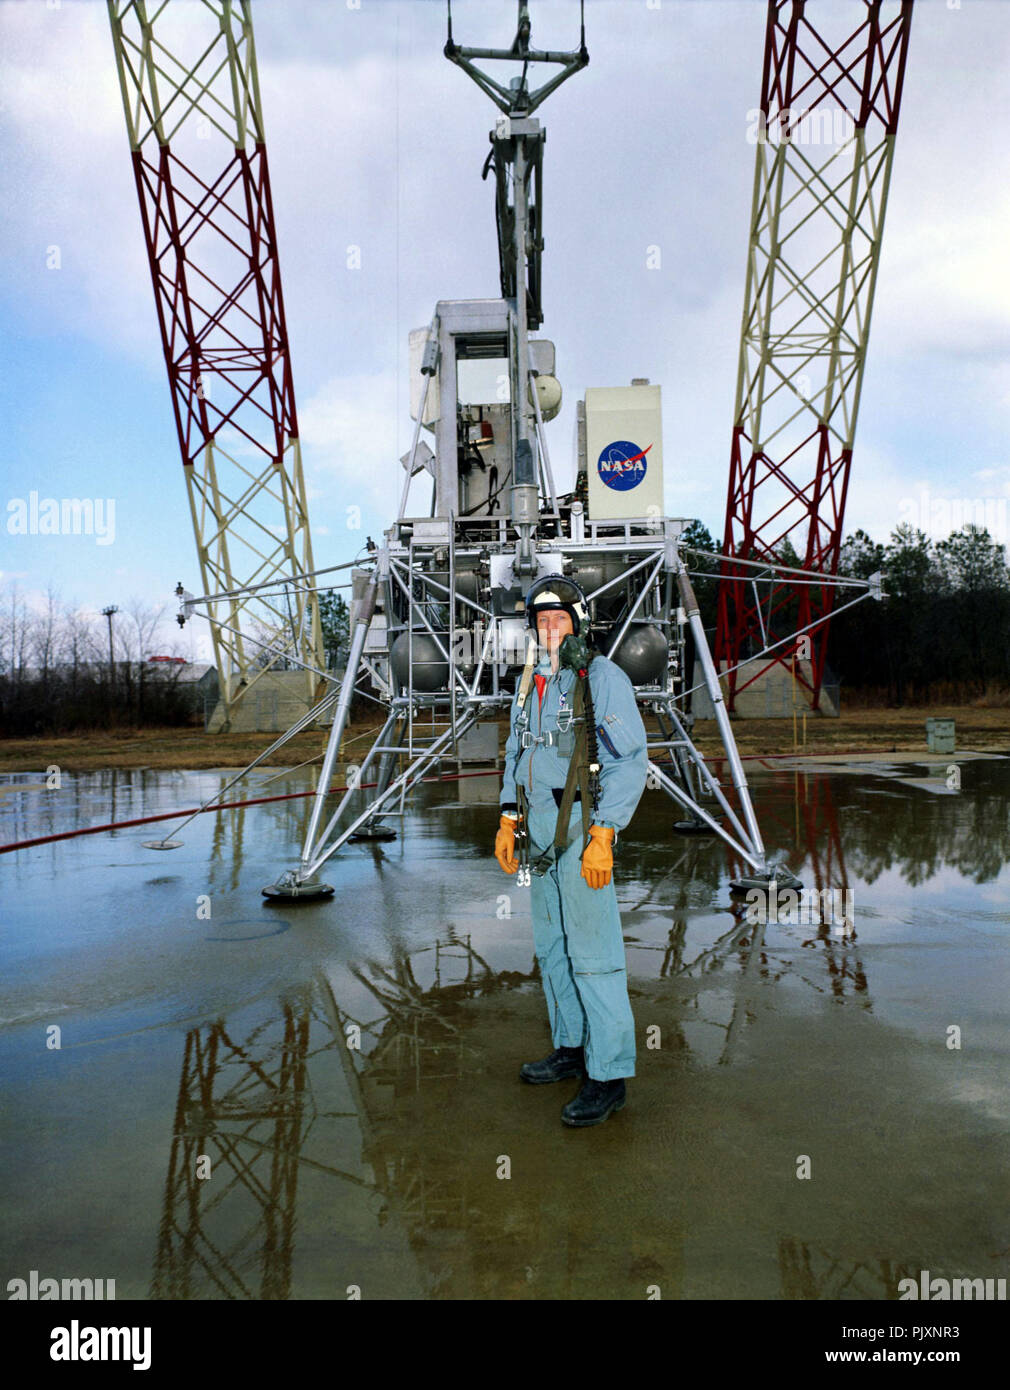 Hampton, VA - (FILE) -- Astronaut Neil Armstrong, Commander, Apollo 11, poses for a photo at Langley Lunar Landing Research Facility in Hampton, Virginia on Wednesday, February 12, 1969. Credit: NASA via CNP /MediaPunch Stock Photo